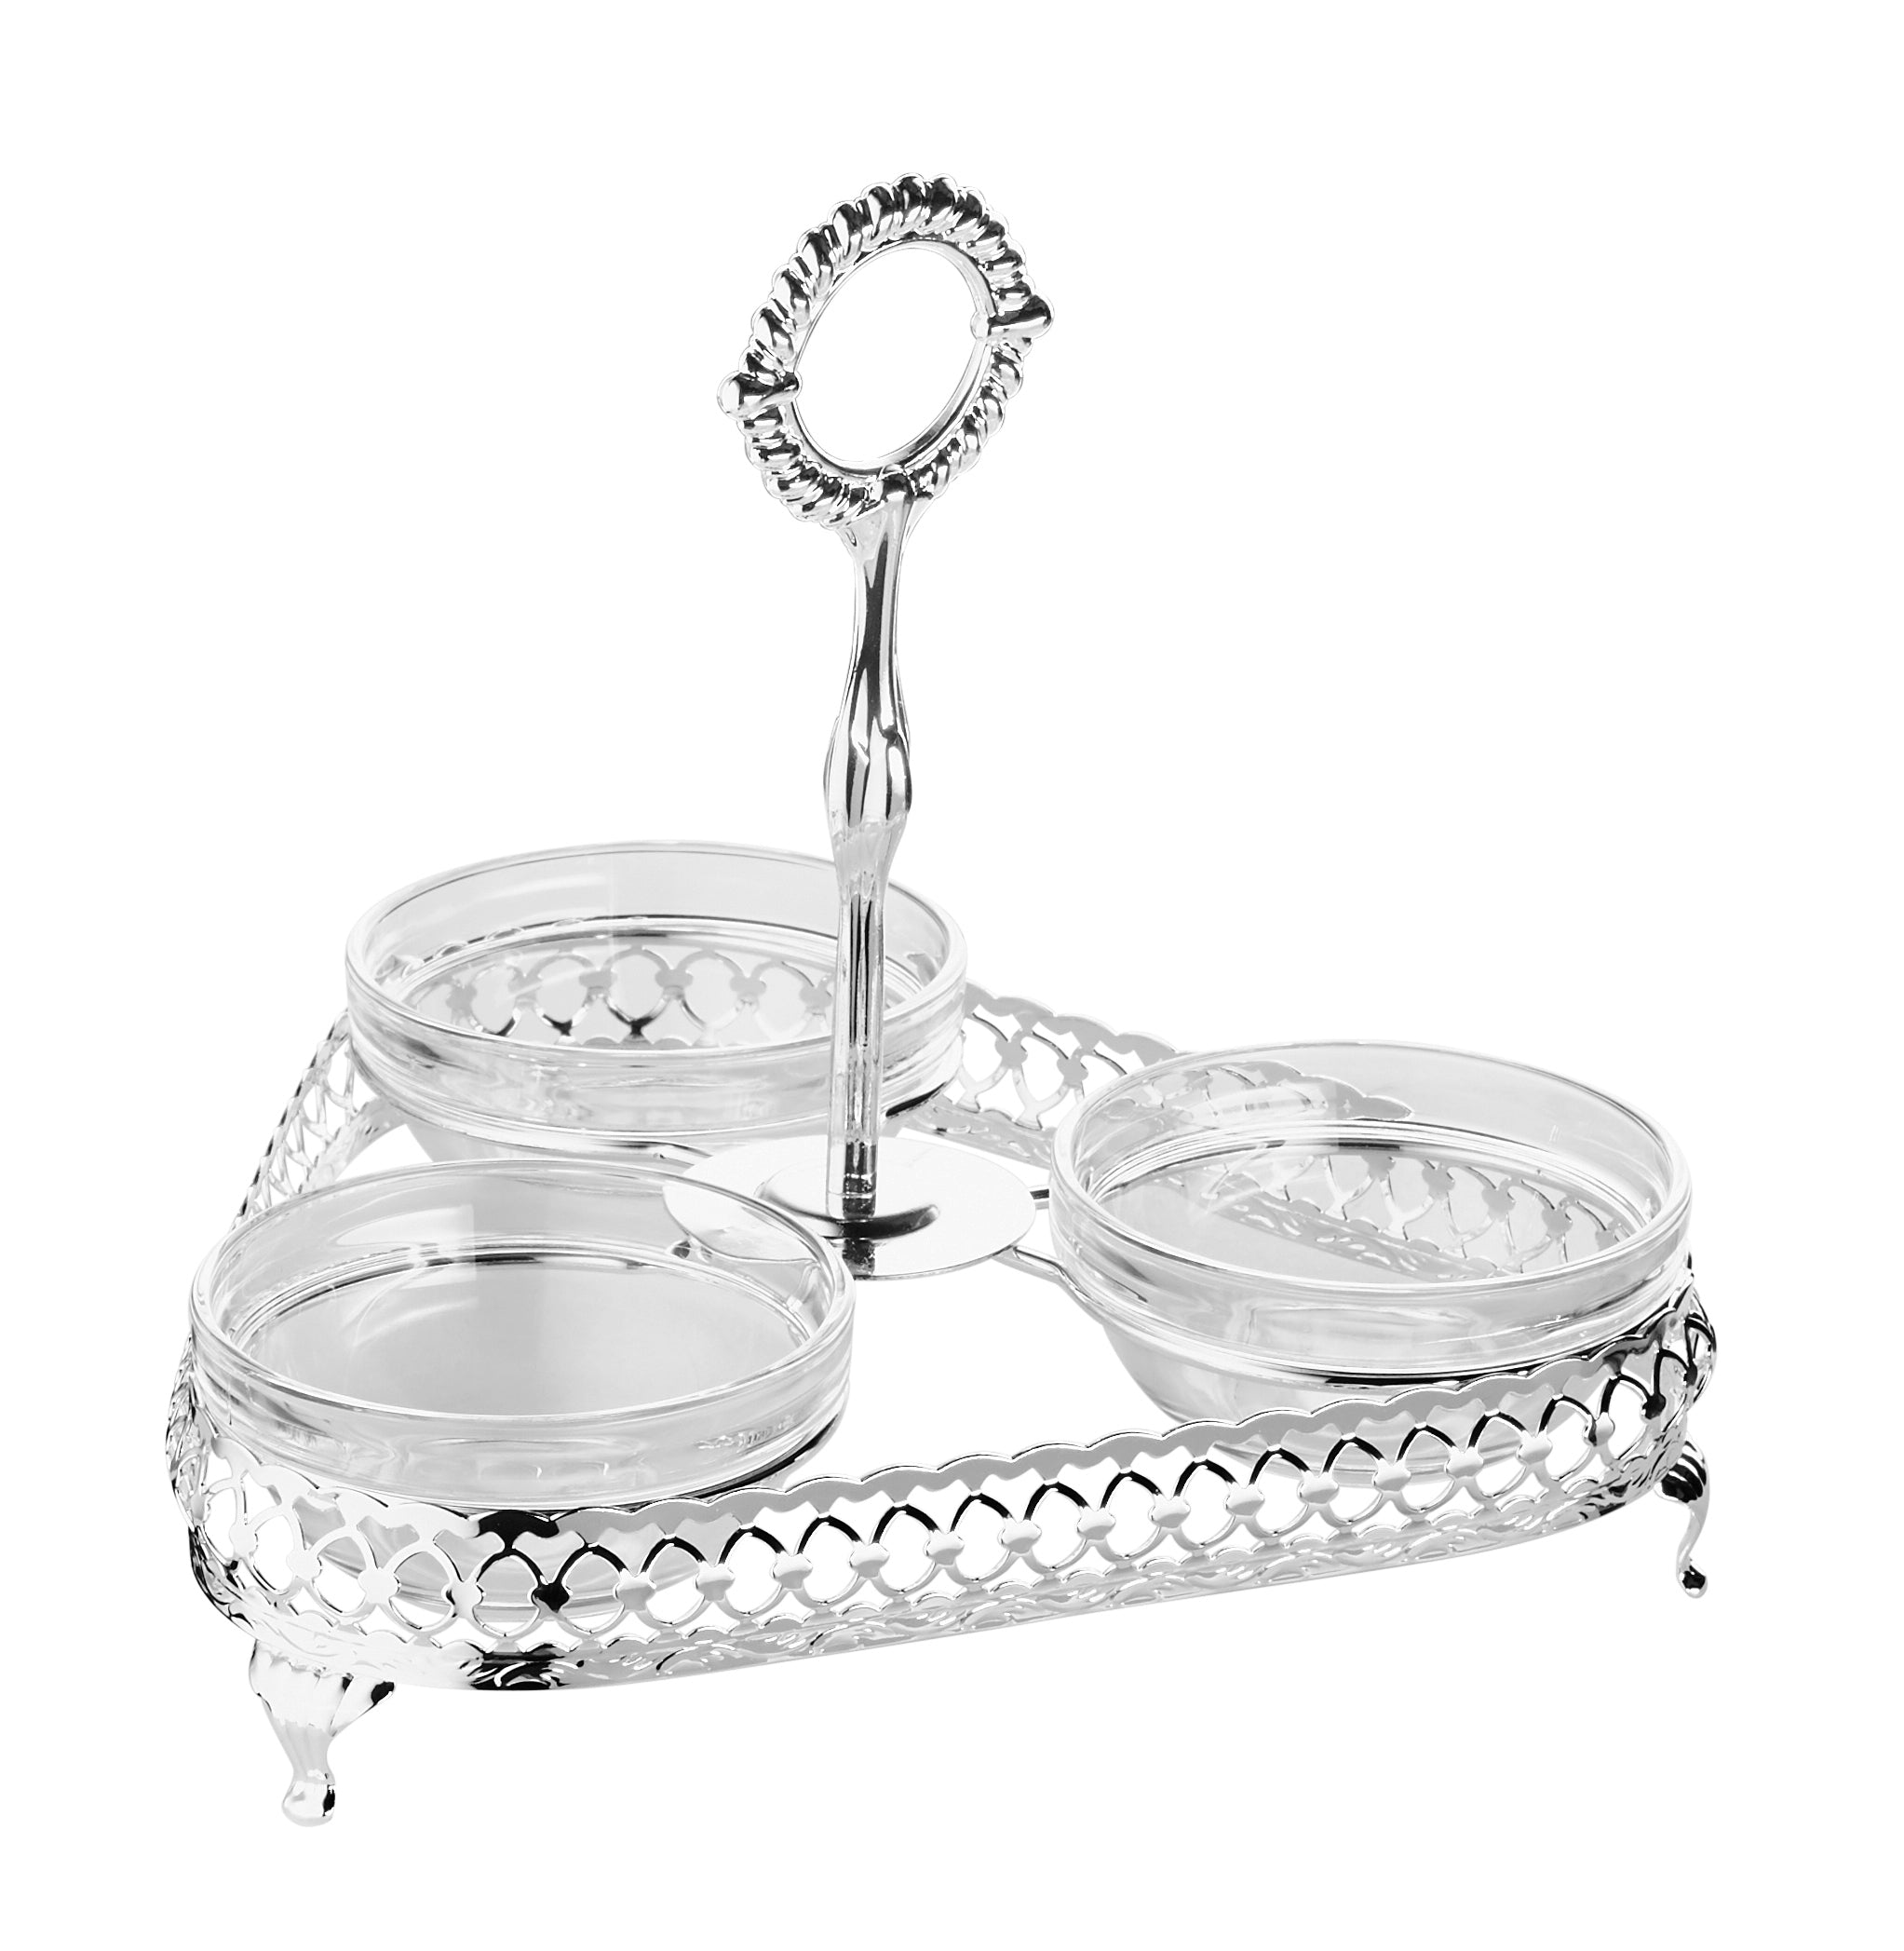 Queen Anne Relish 3-Piece Set Tarnish Resistant Silver Plated Tableware Made in England - Royal Gift